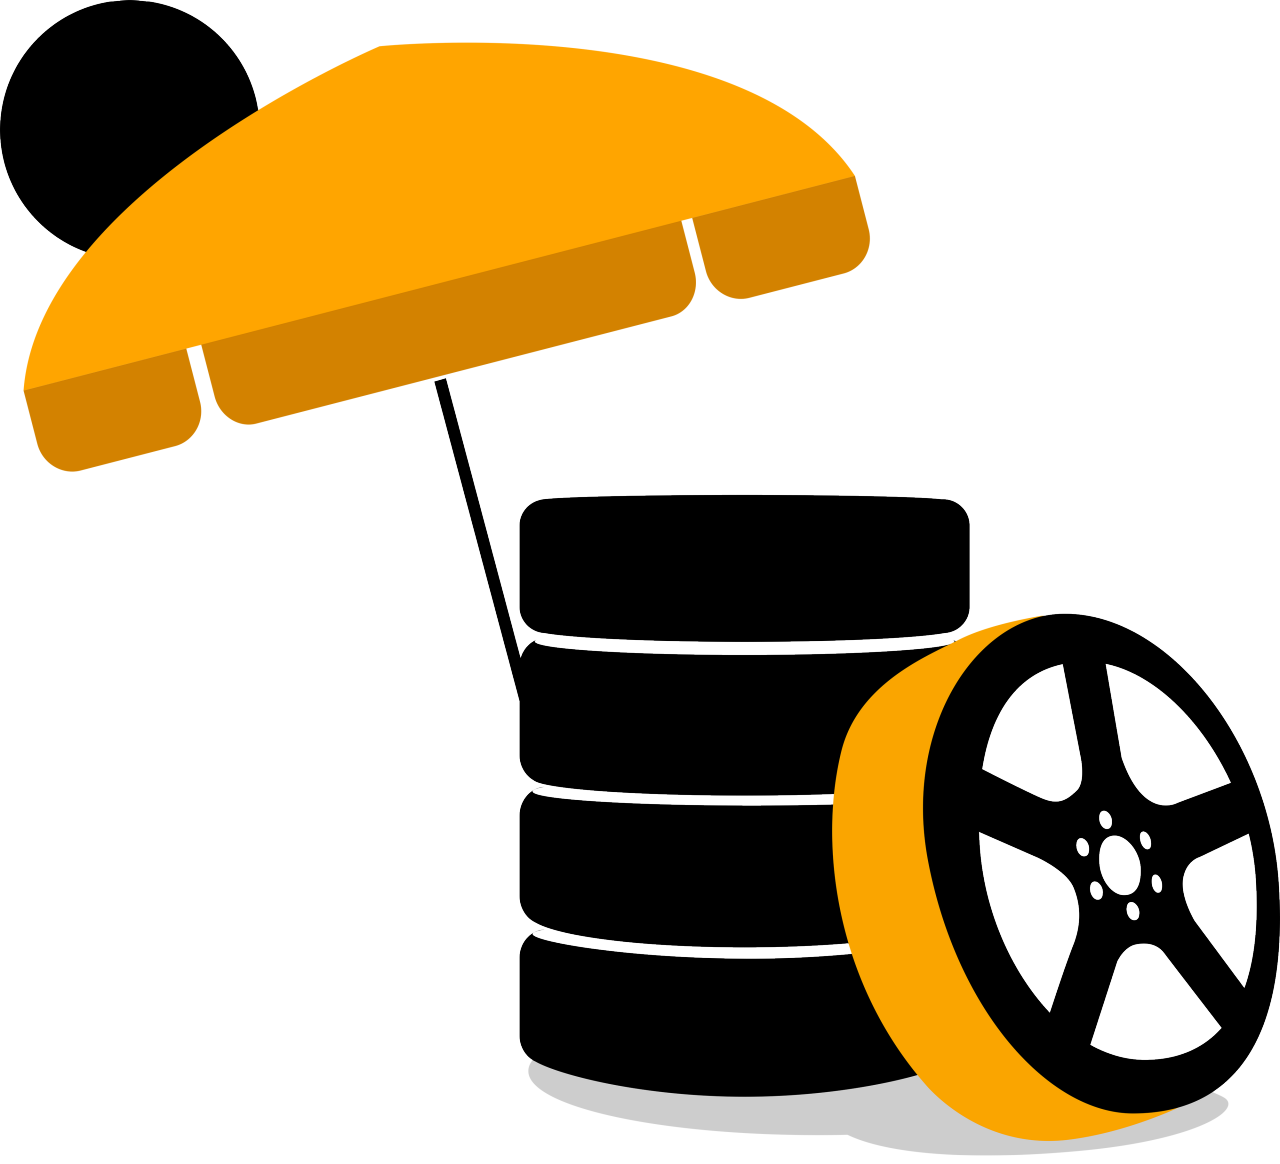 Graphics showing tires next to a parasol.